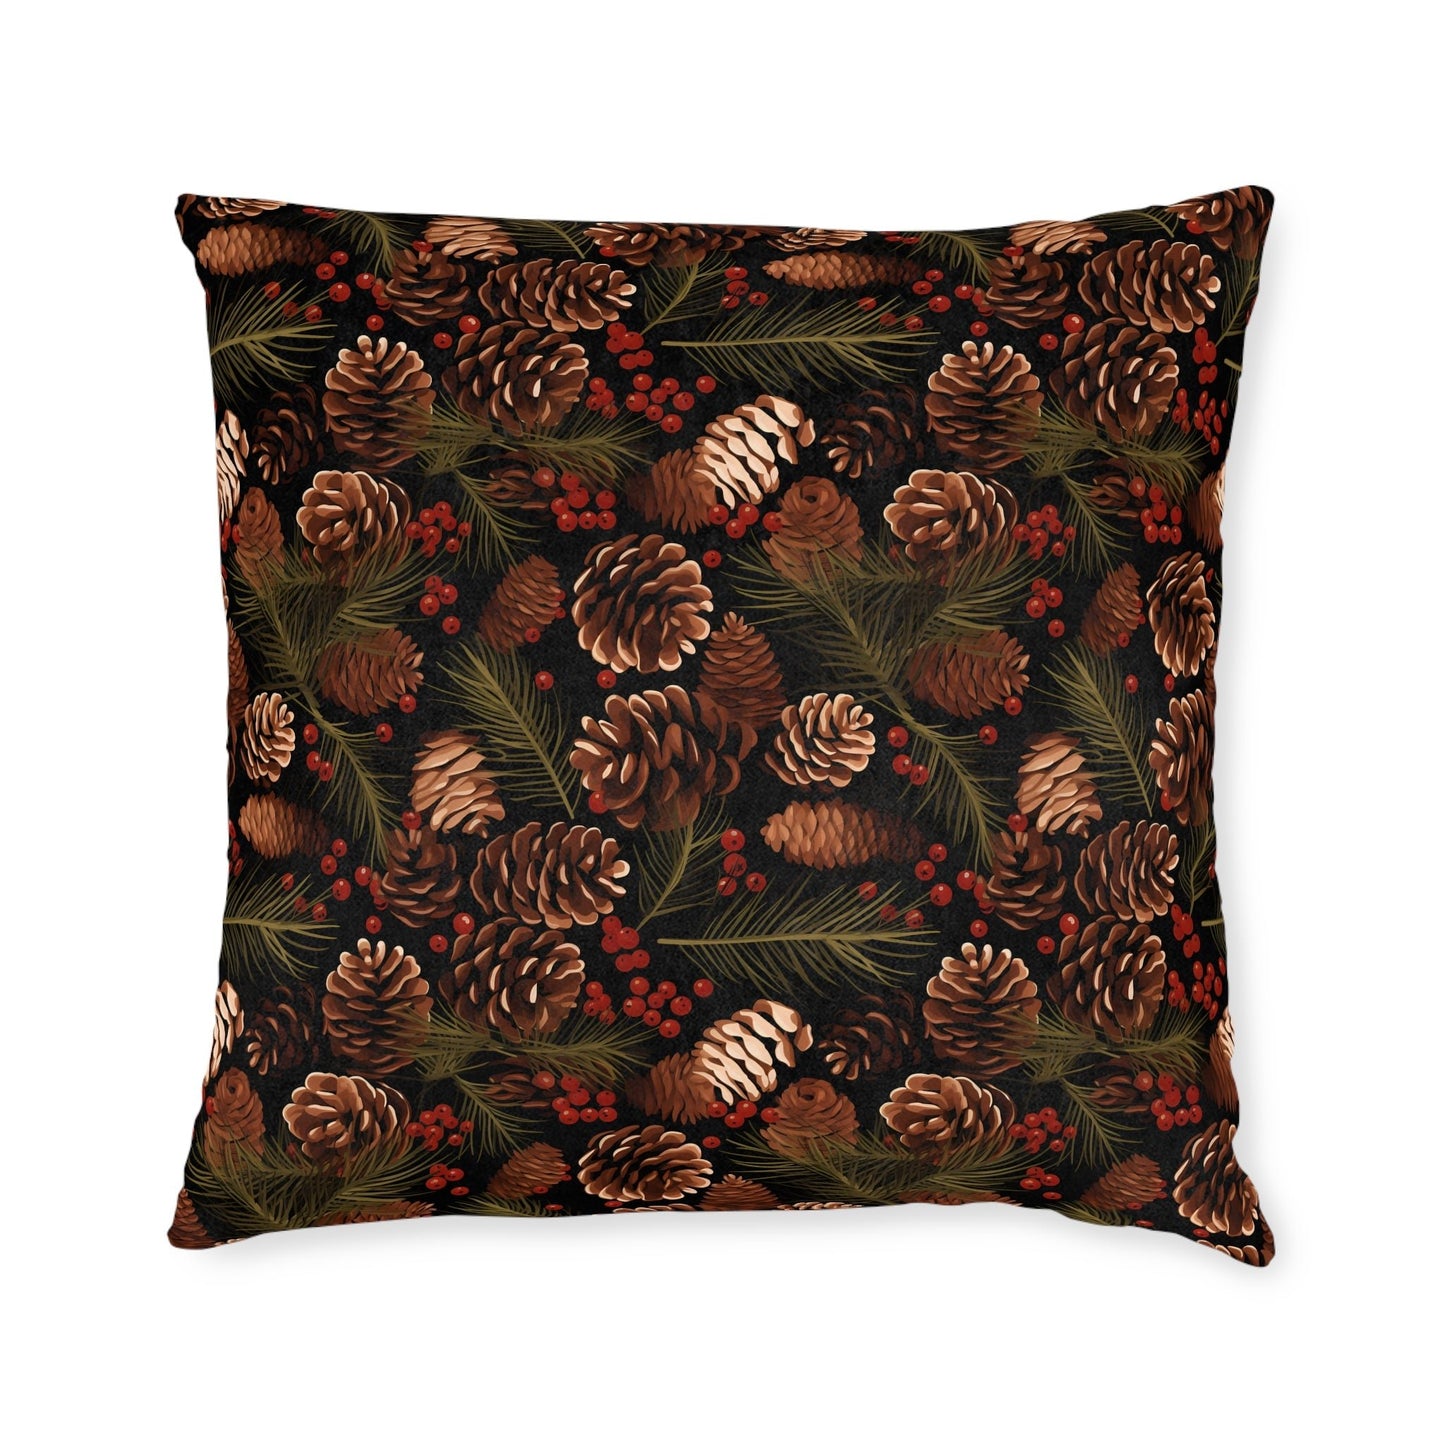 Winter Berries - Pinecone Profusion - Sofa and Chair Cushion - Pattern Symphony